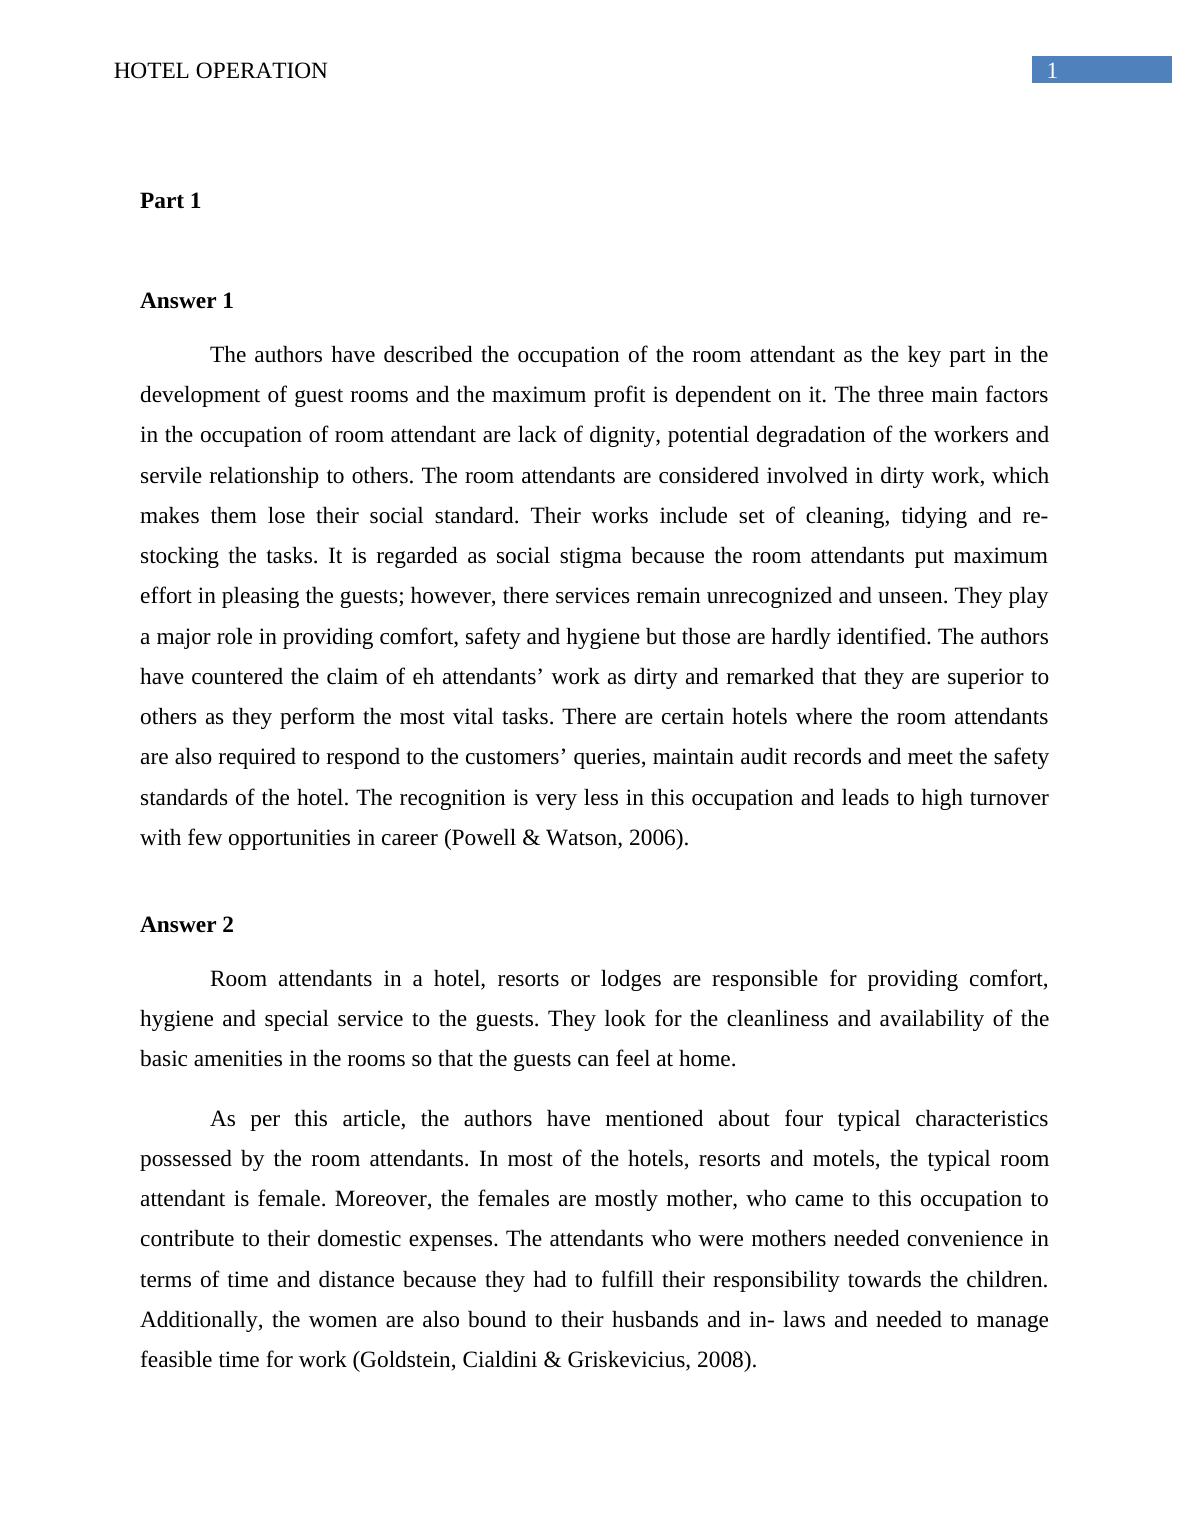 research paper on hospitality management pdf